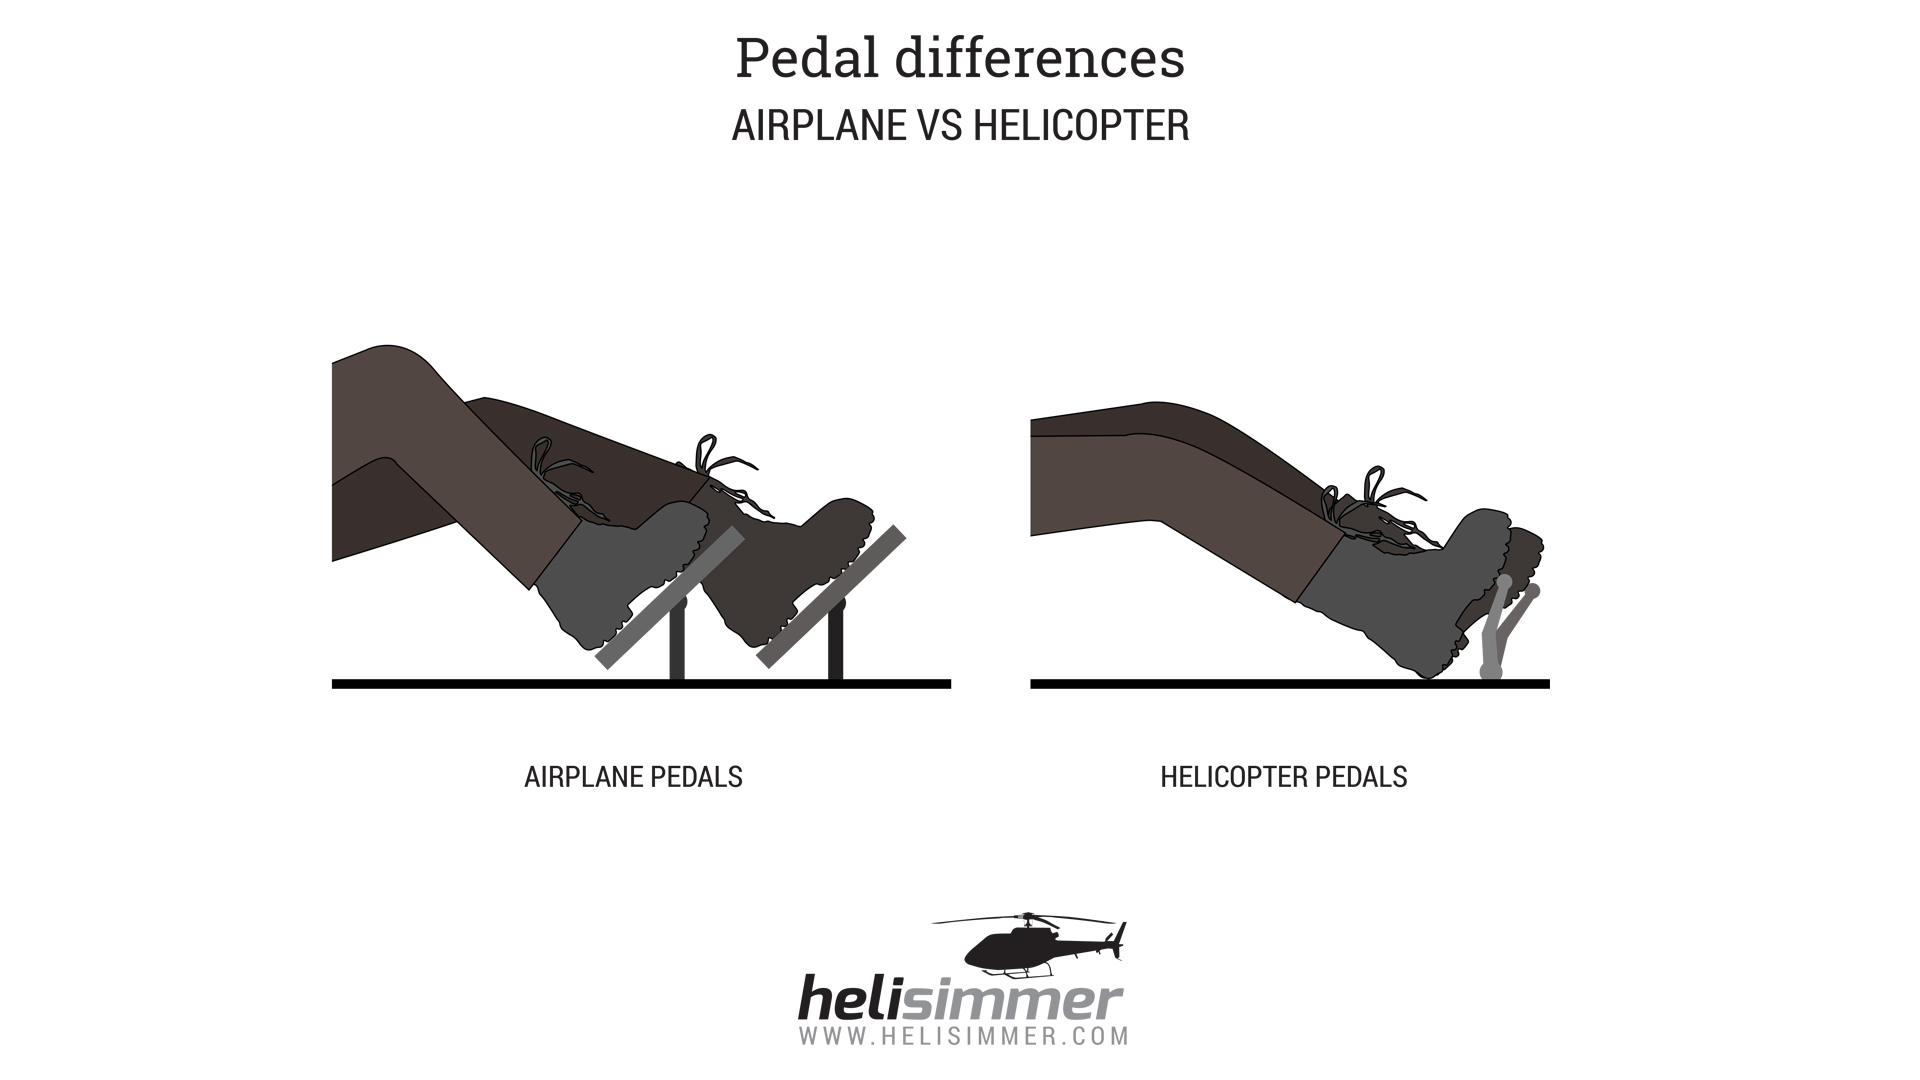 Pedal differences between airplanes and helicopters